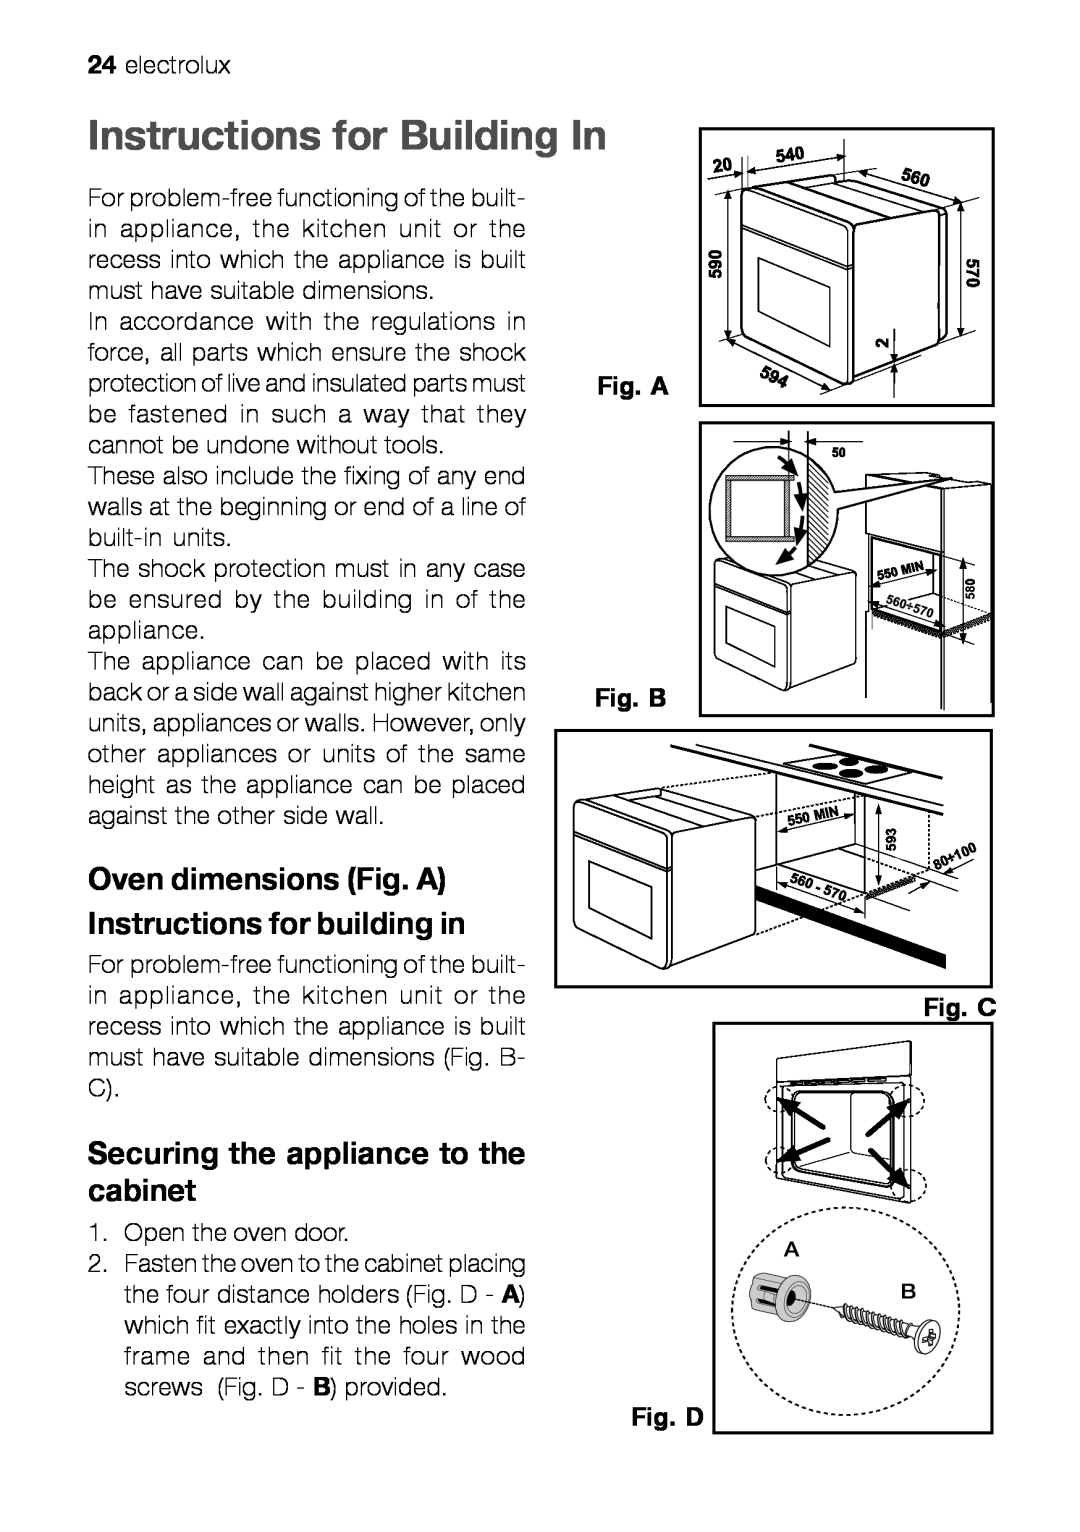 Electrolux EOB 21001 Instructions for Building In, Oven dimensions Fig. A Instructions for building in, Fig. A Fig. B 